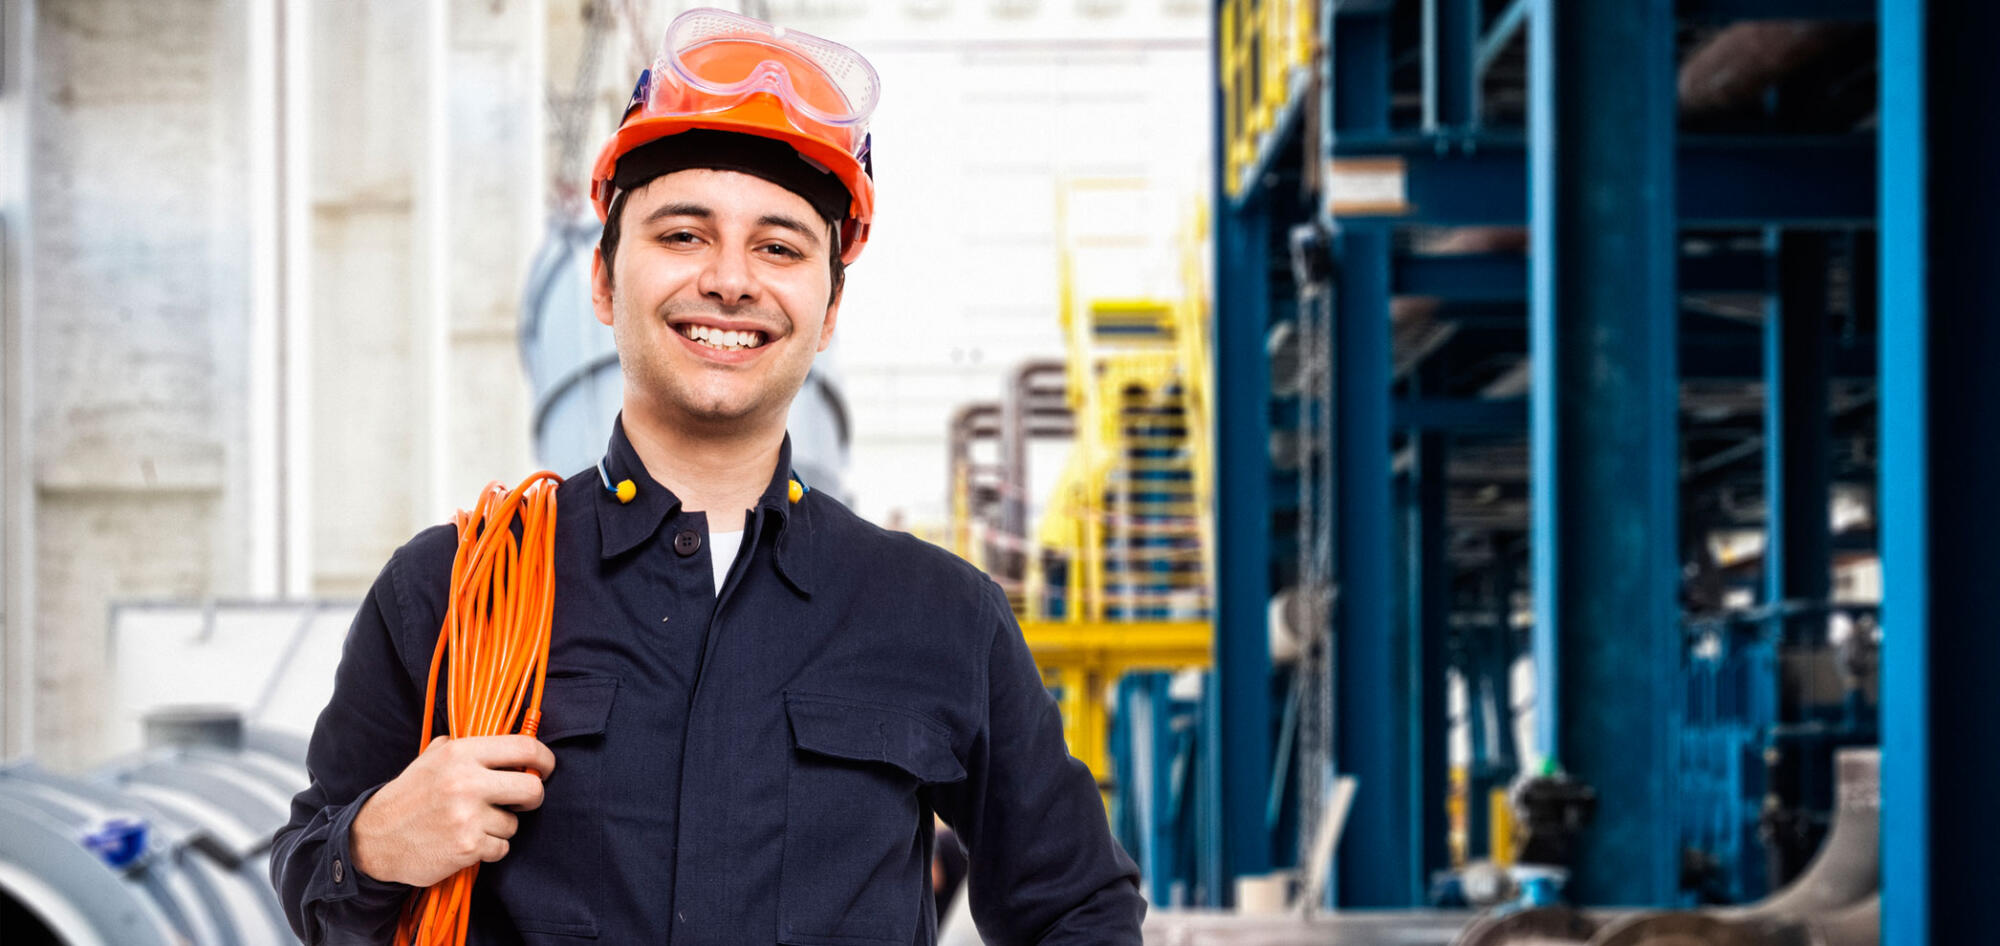 An electrician in a hard hat is smiling in front of a factory.